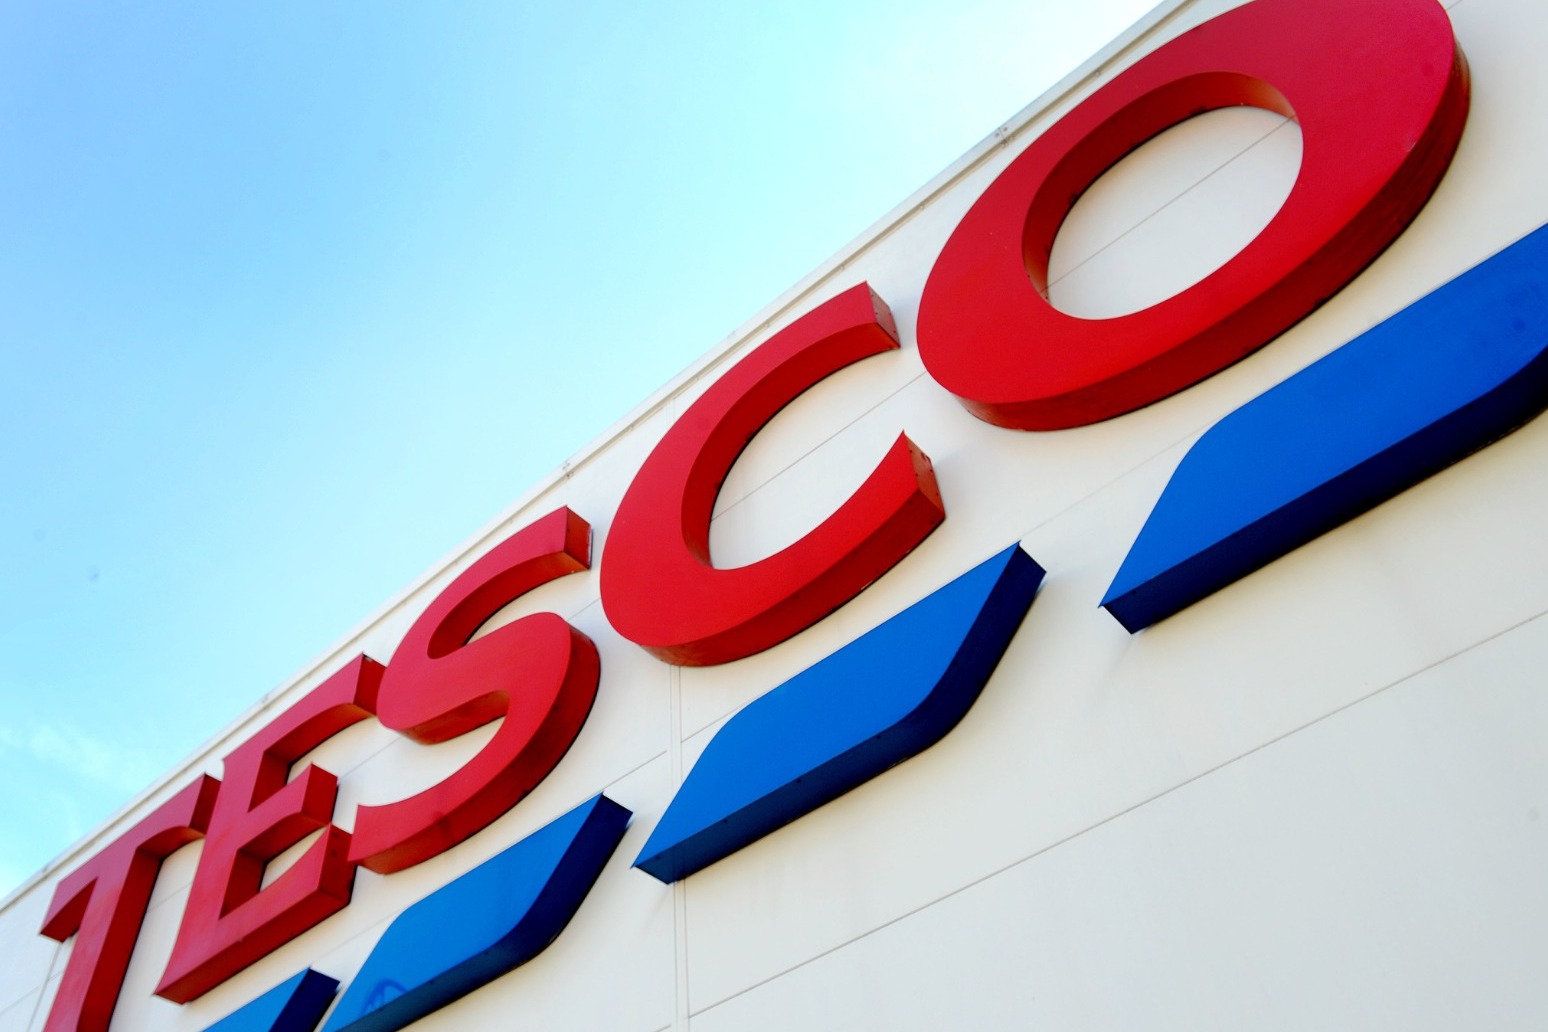 Tesco customers ‘disappointed’ at changes to Clubcard rewards scheme 